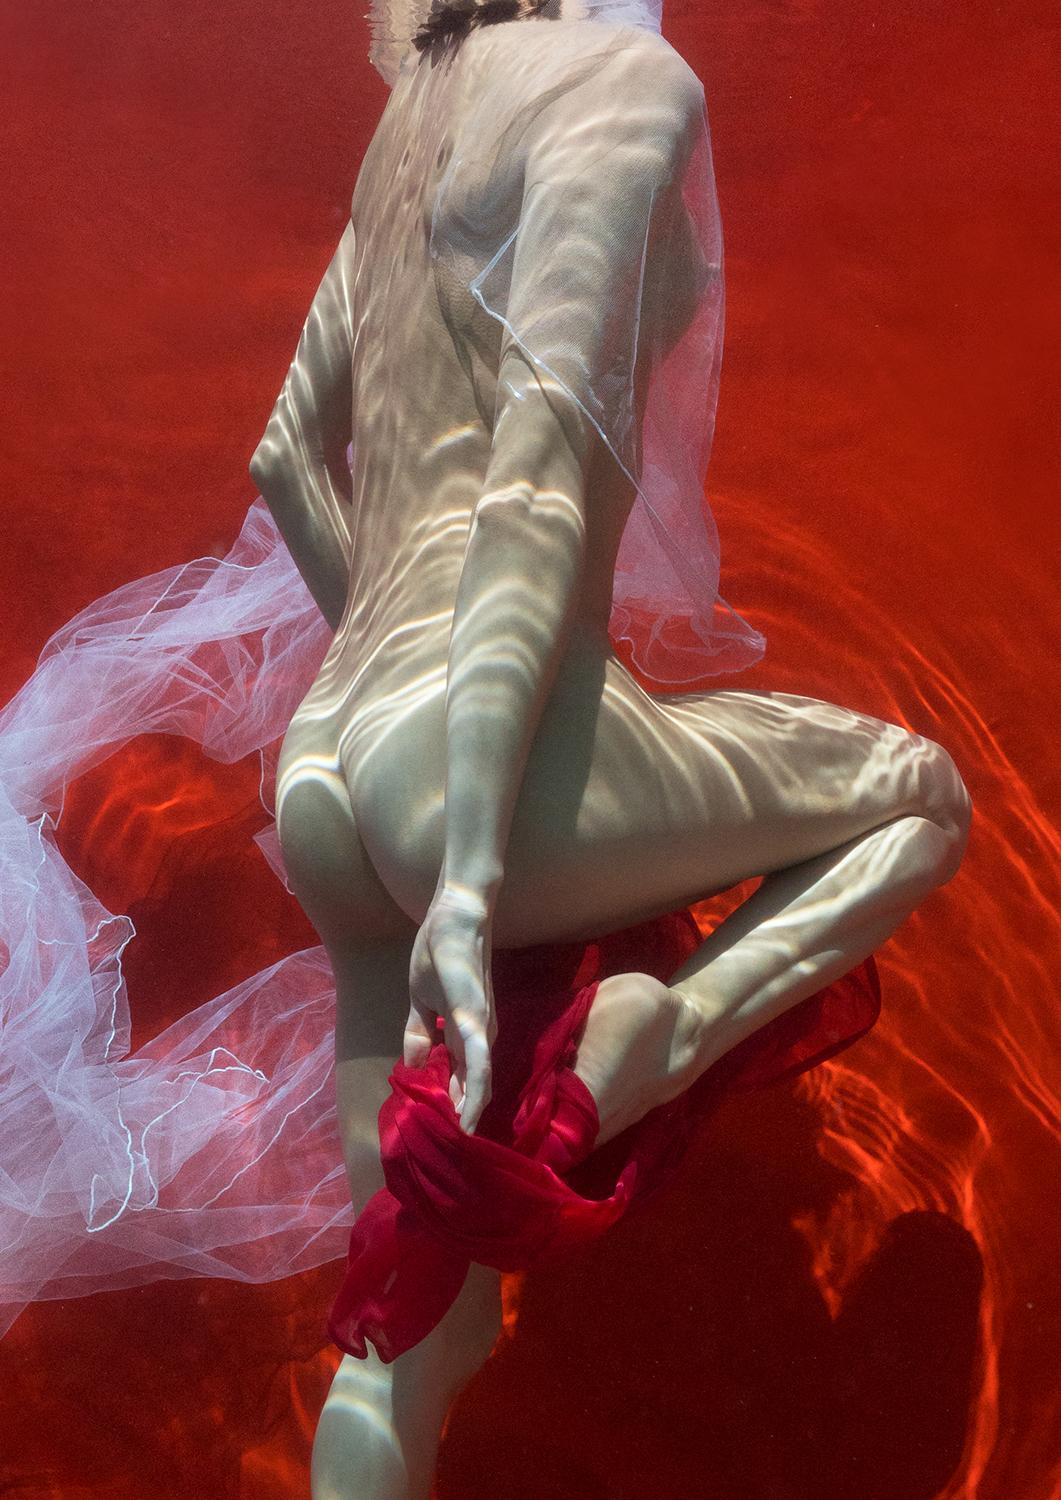 Blood and Milk VII  - underwater nude photograph, archival print on paper 16x23